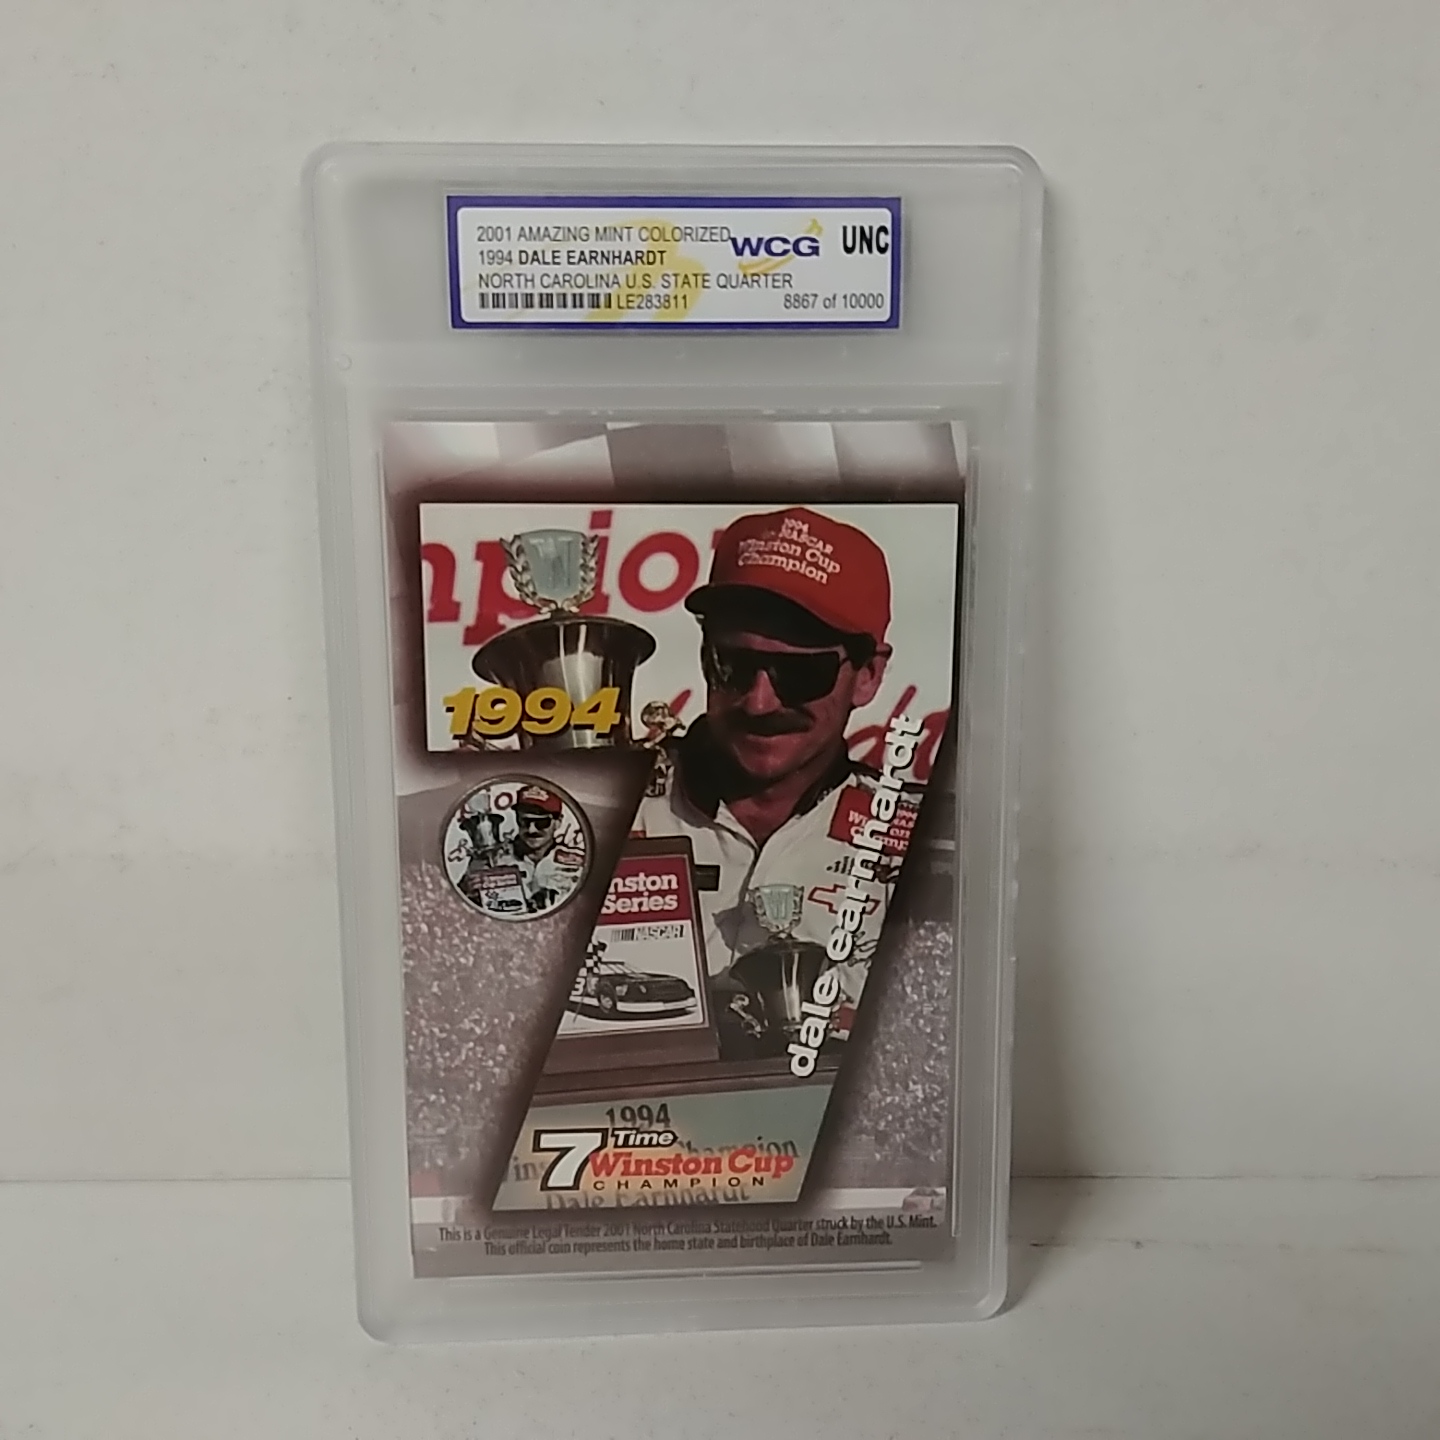 2001 Dale Earnhardt Card and Quarter 1994 7 Time Champion 